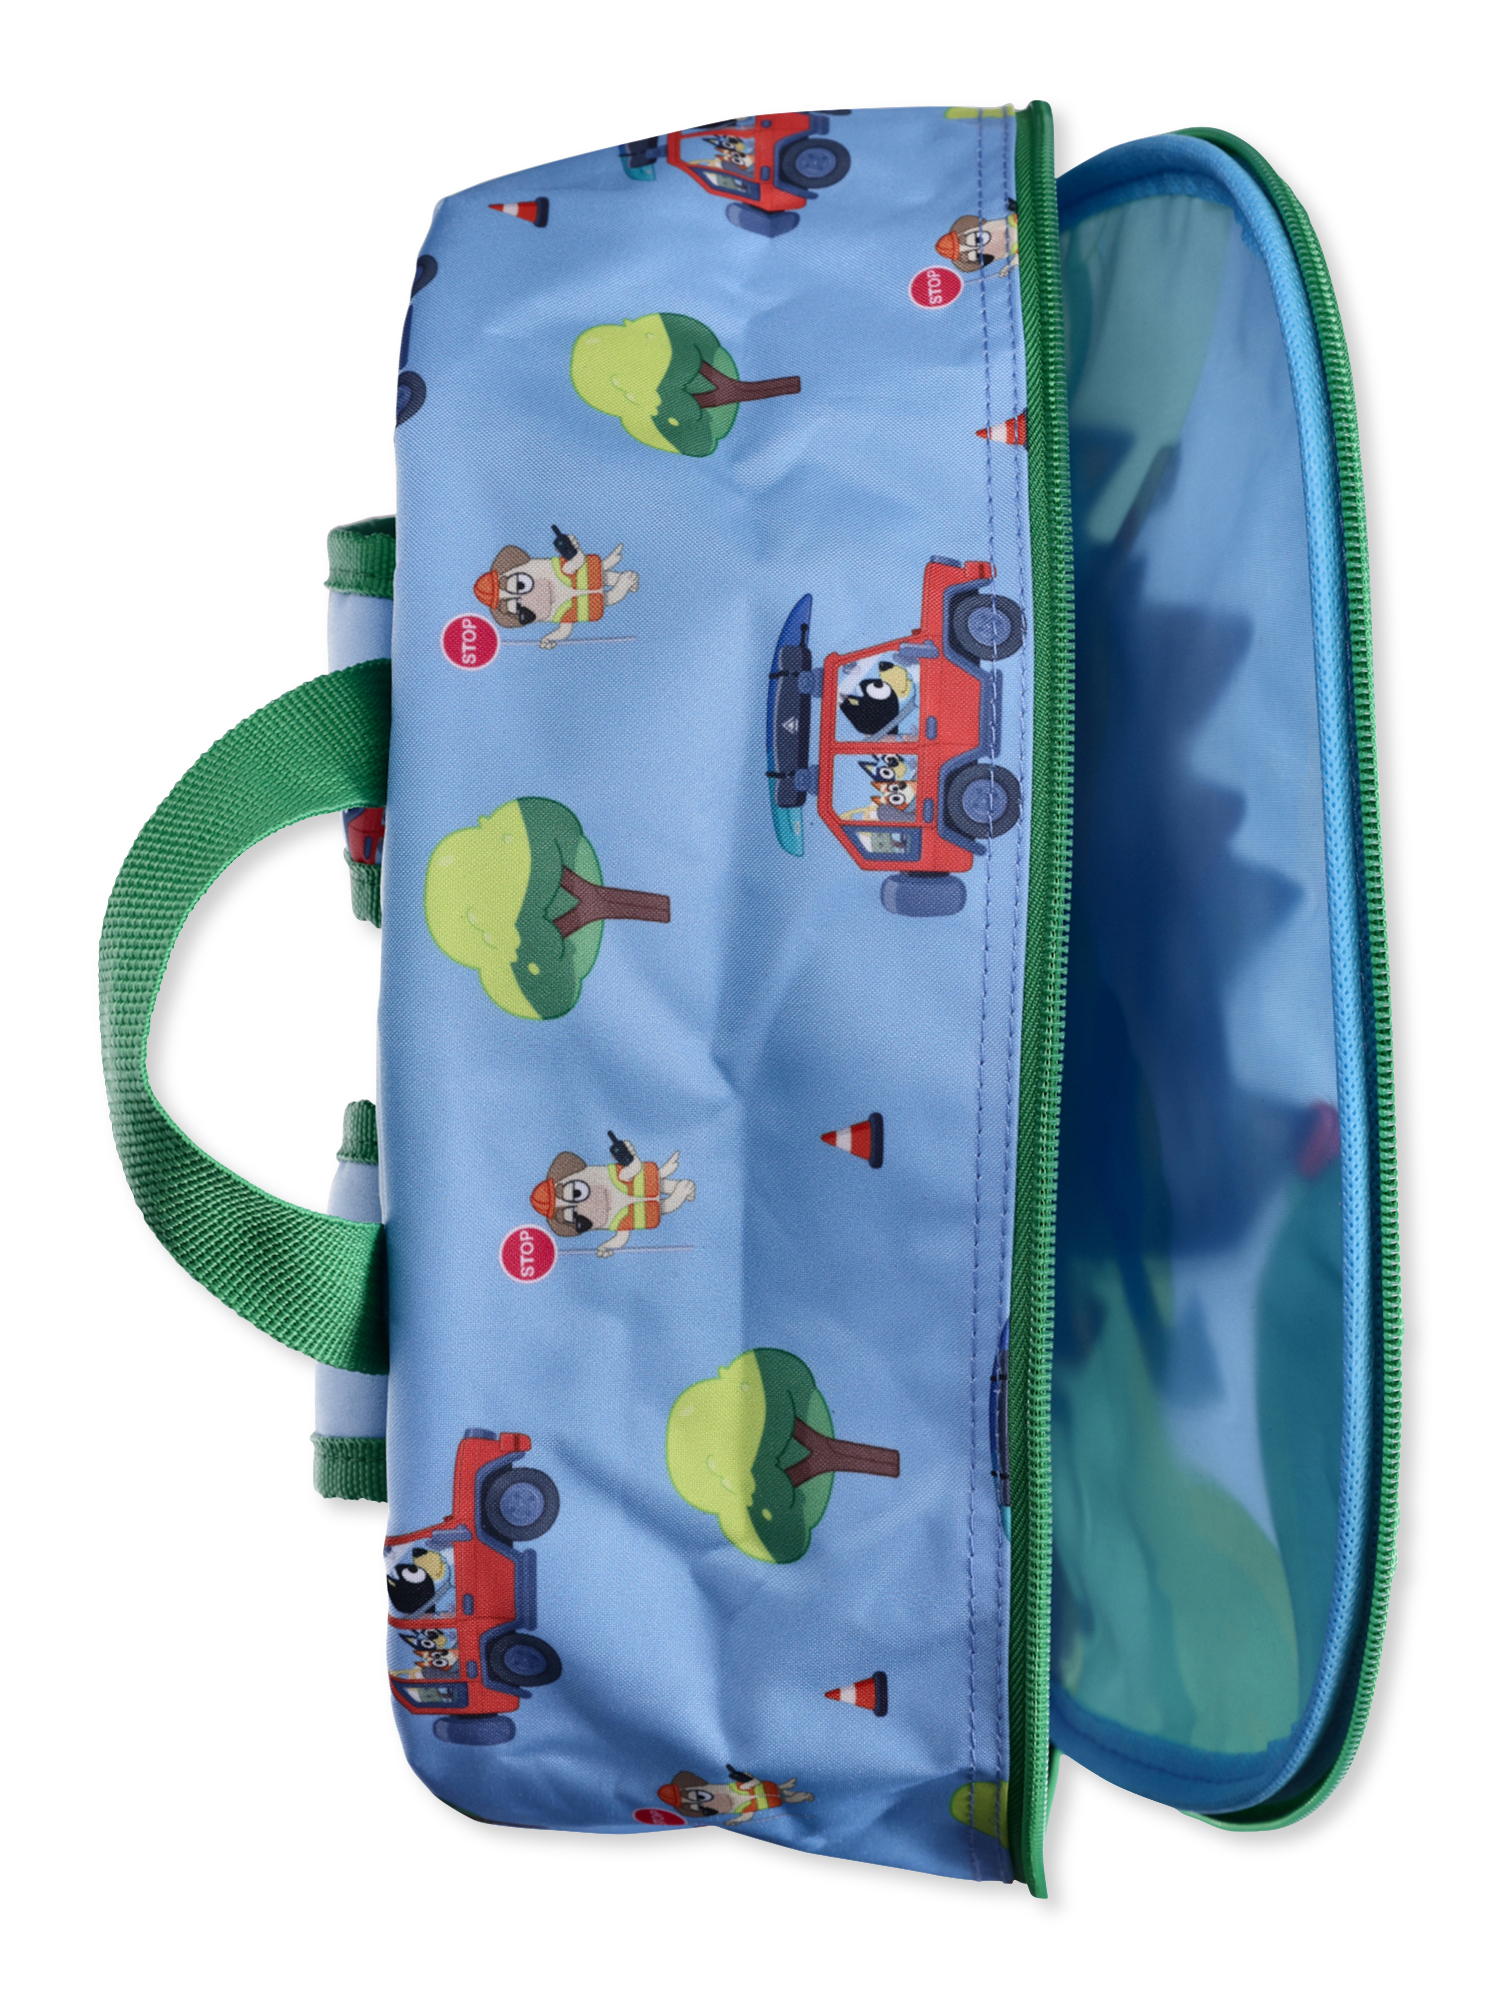 BBC Bluey Family Trip Children’s Laptop Backpack with Lunch Bag, 2-Piece Set - image 4 of 8